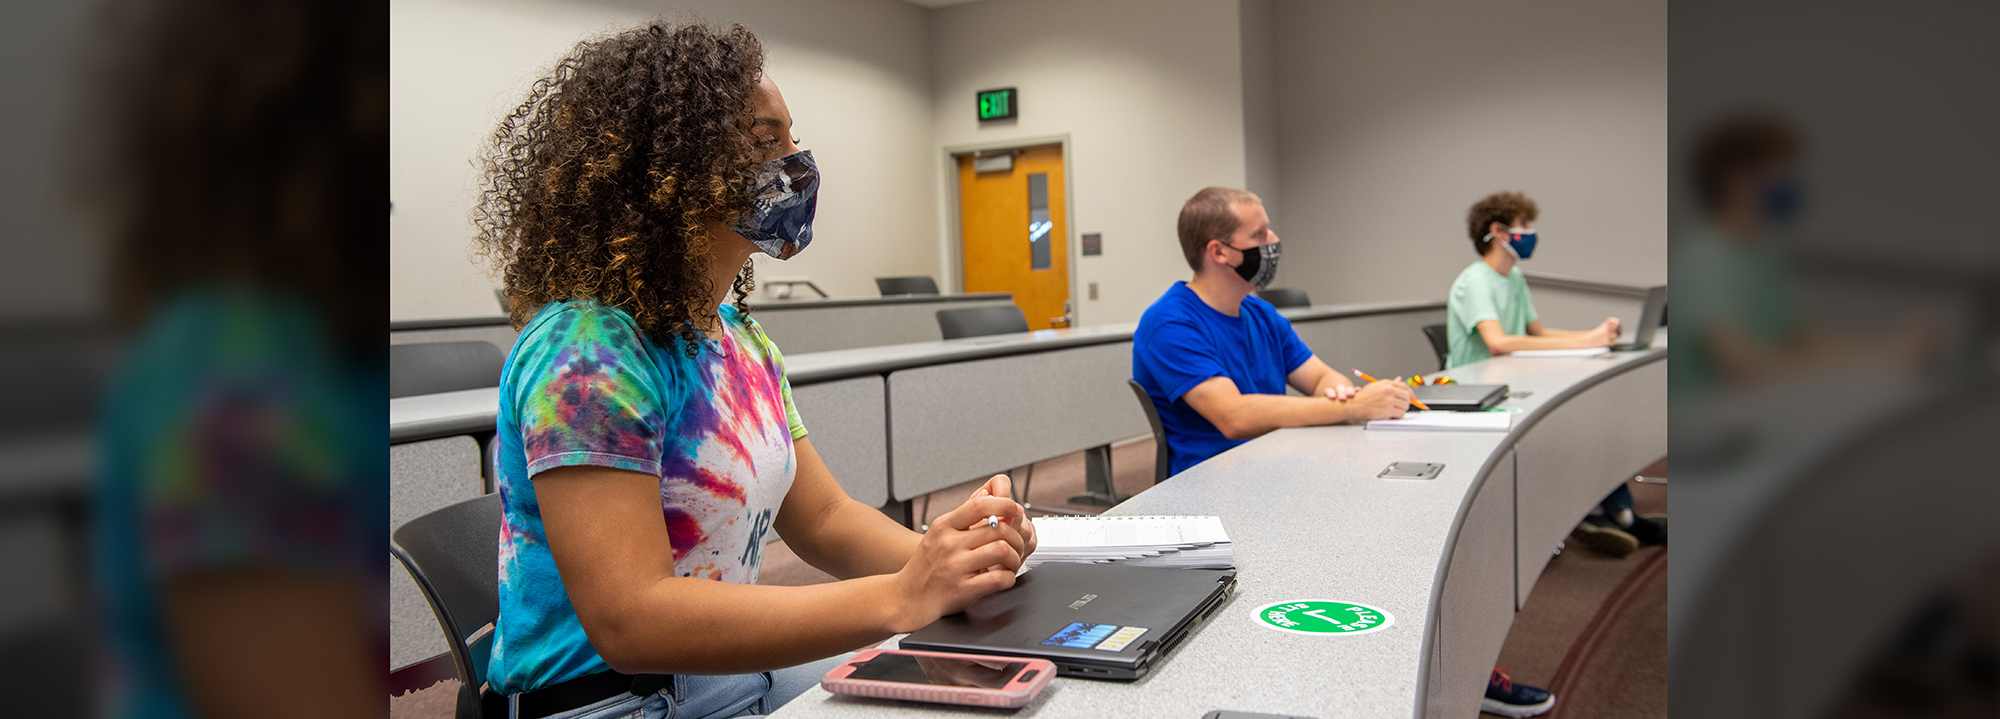 Students with masks sit in class listening to a professor